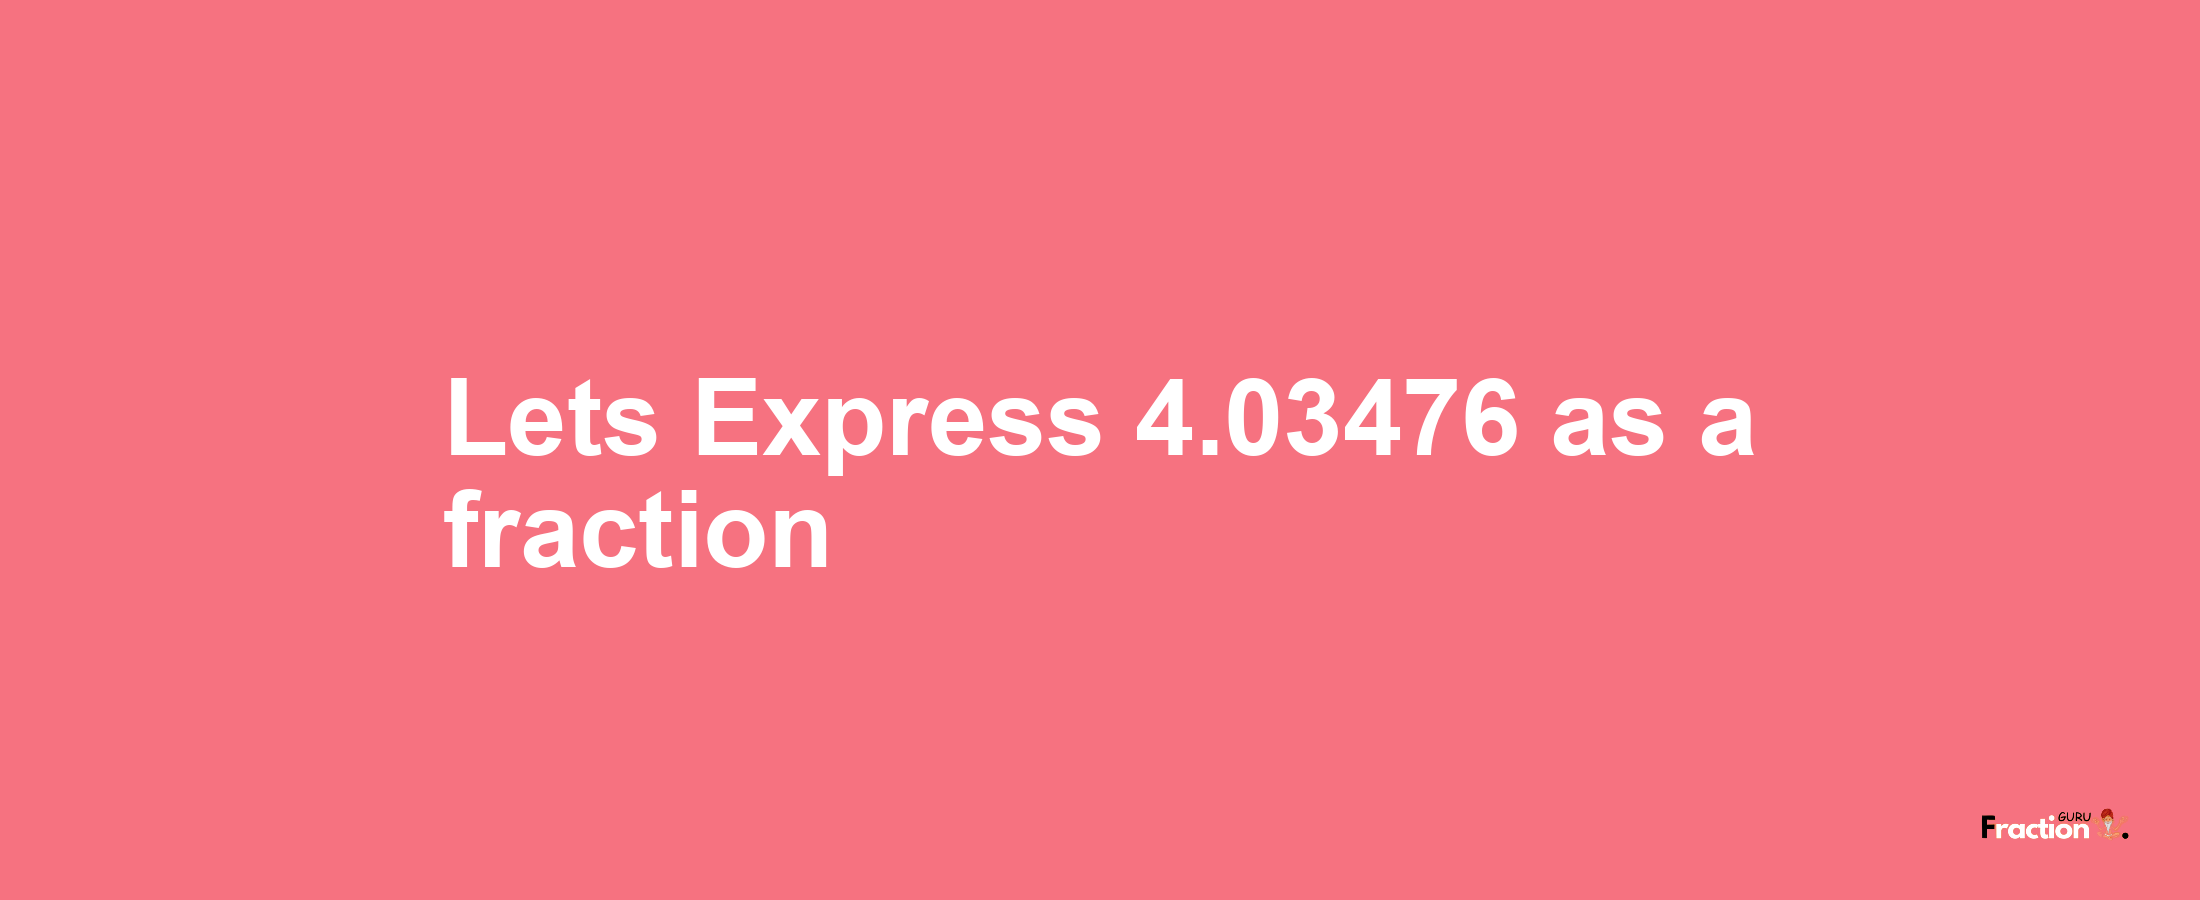 Lets Express 4.03476 as afraction